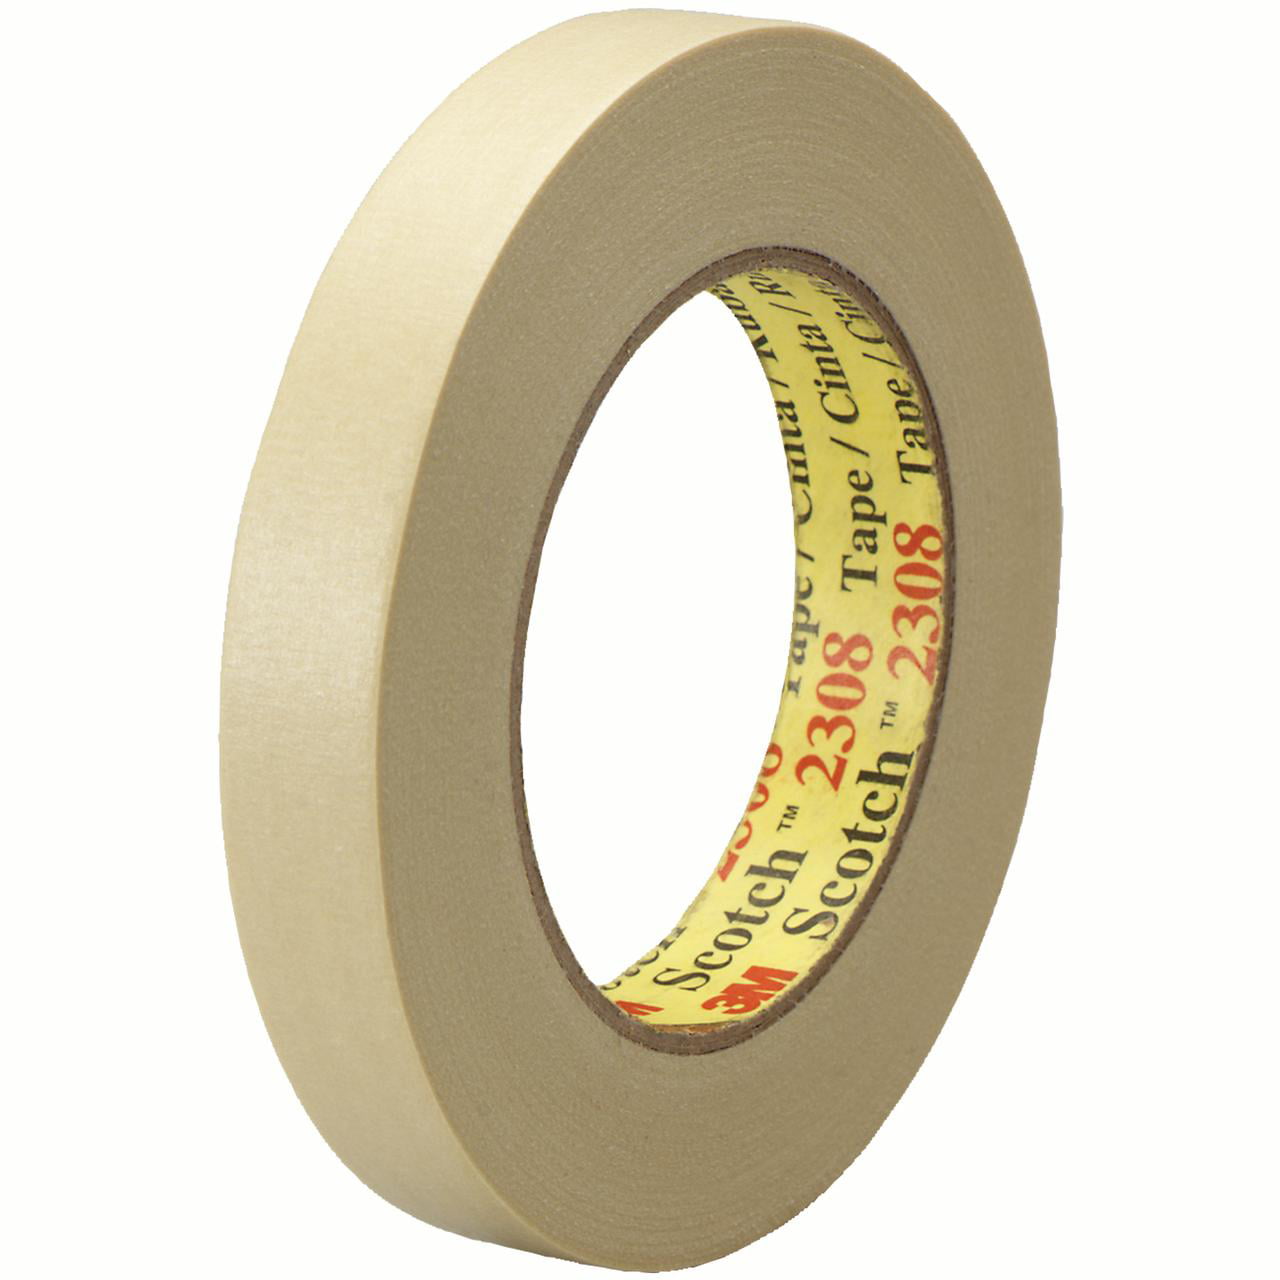 Scotch T934230812pk 0.75 In. X 60 Yards 2308 Masking Tape, Natural - Pack Of 12